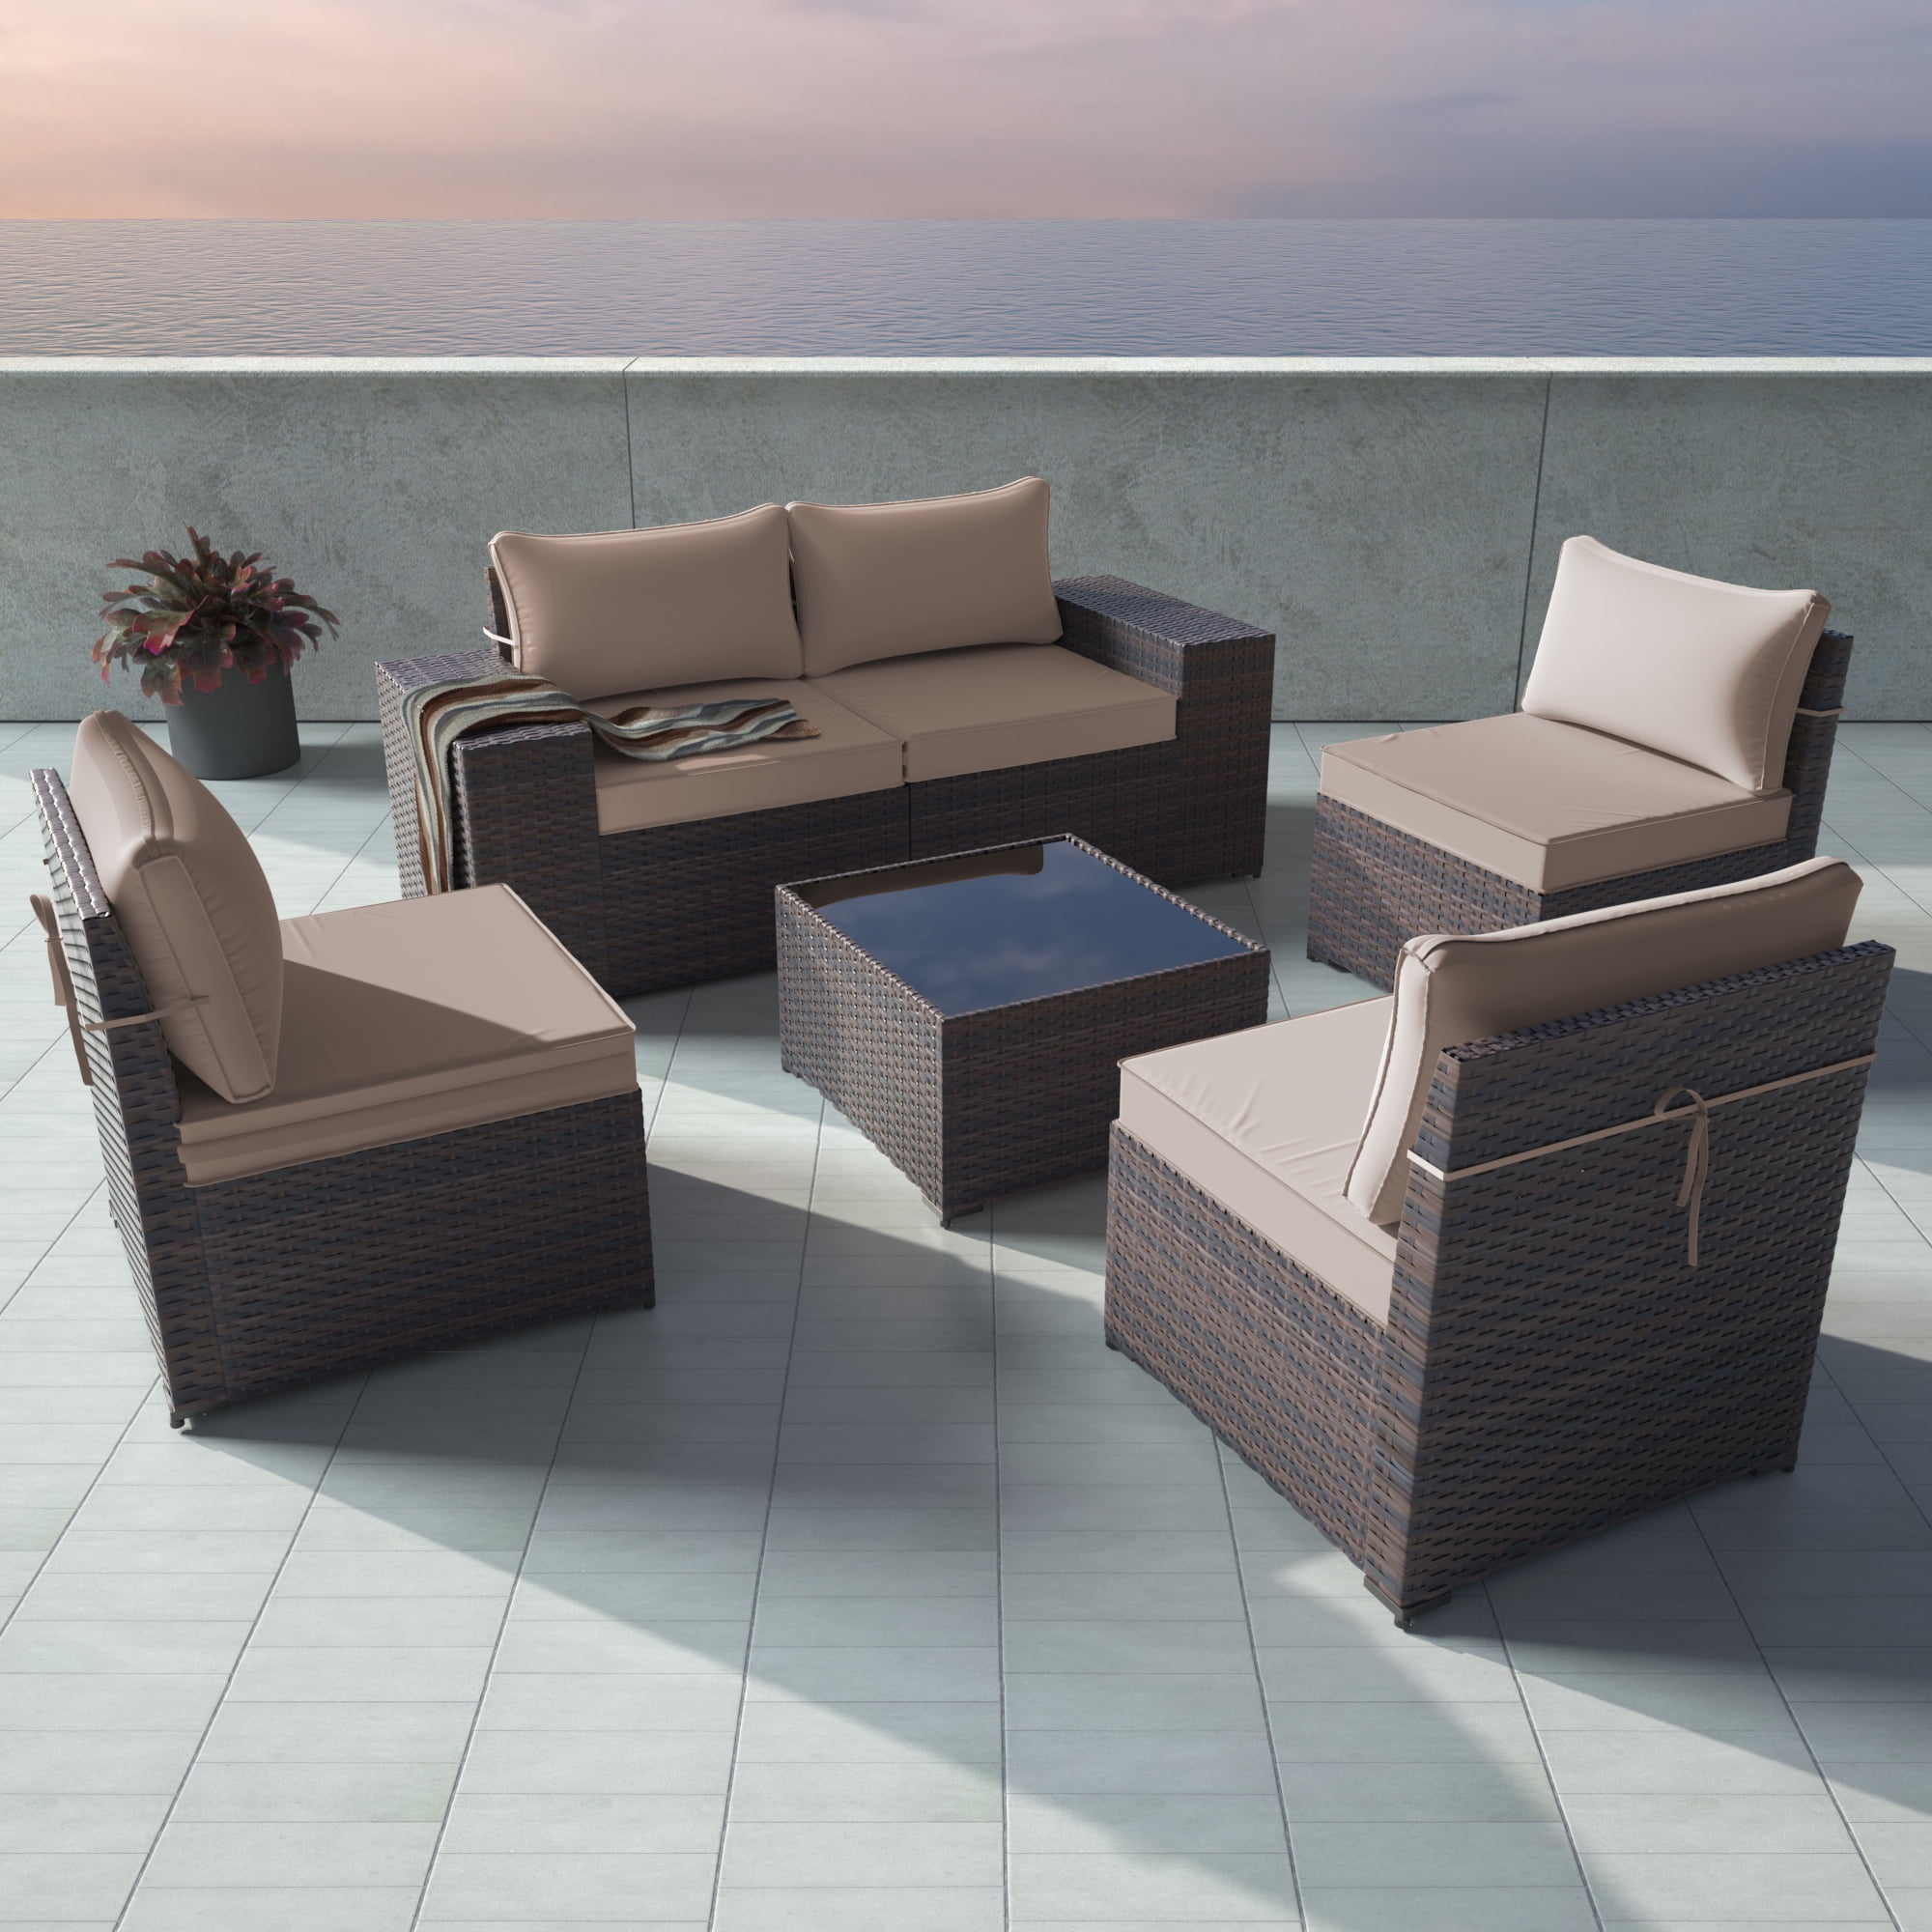 FDW 4 Pieces Outdoor Patio Furniture Sets Rattan Chair Wicker,Brown 